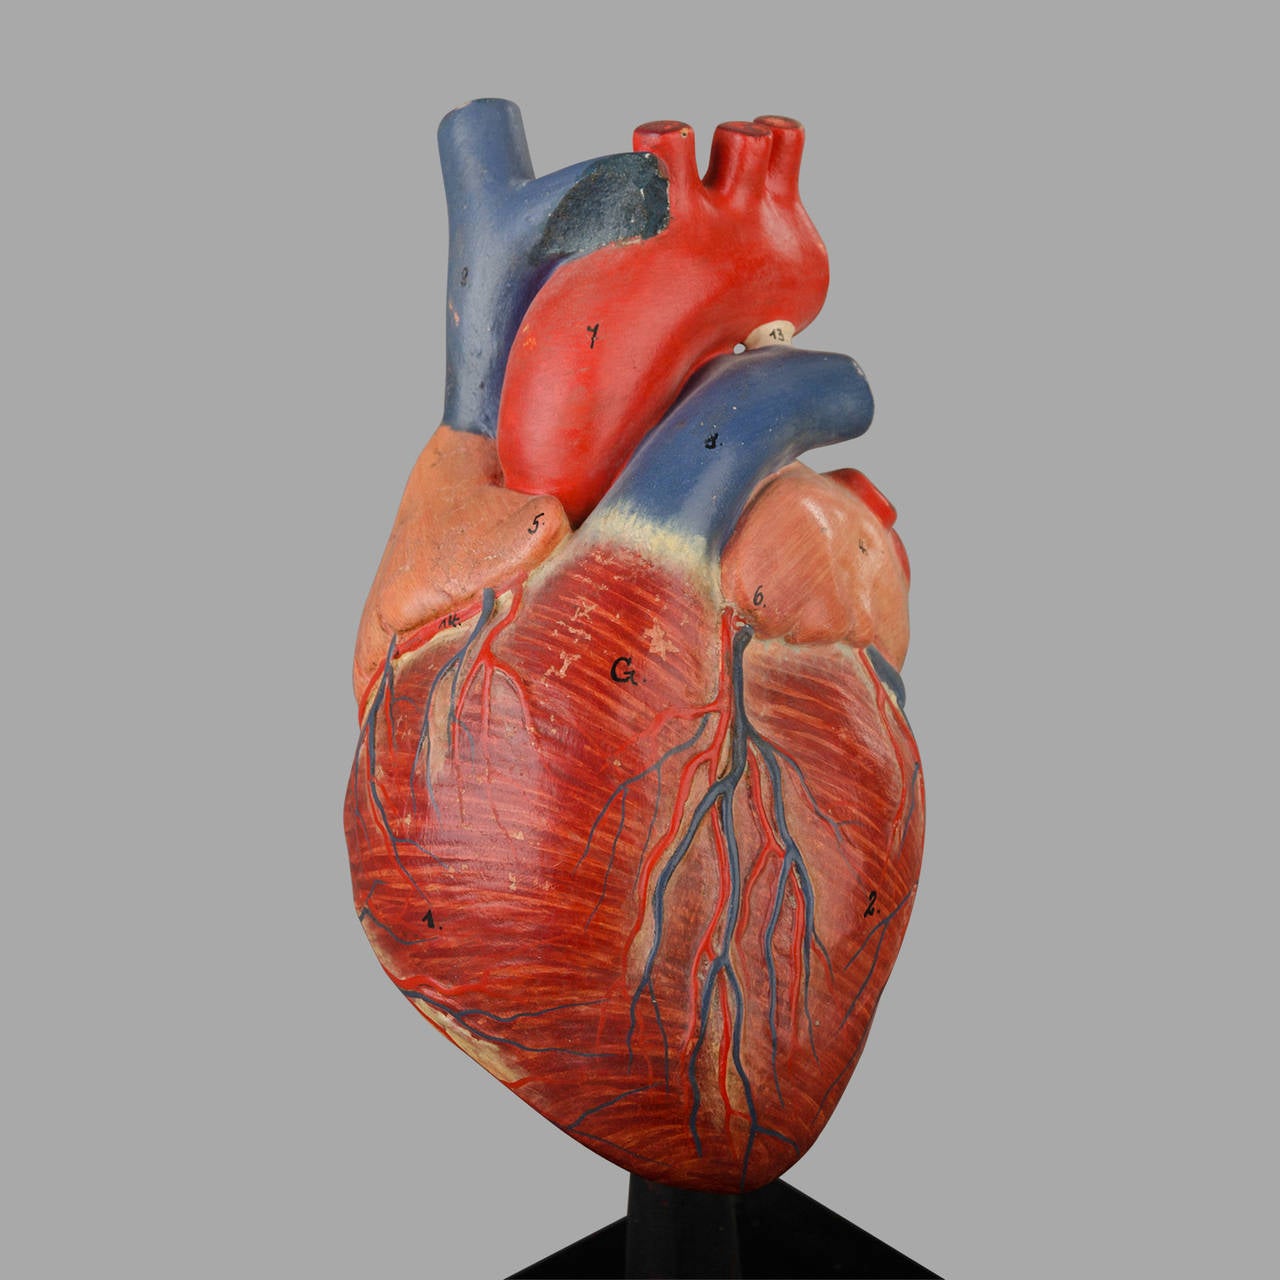 French Anatomical Model of the Human Heart